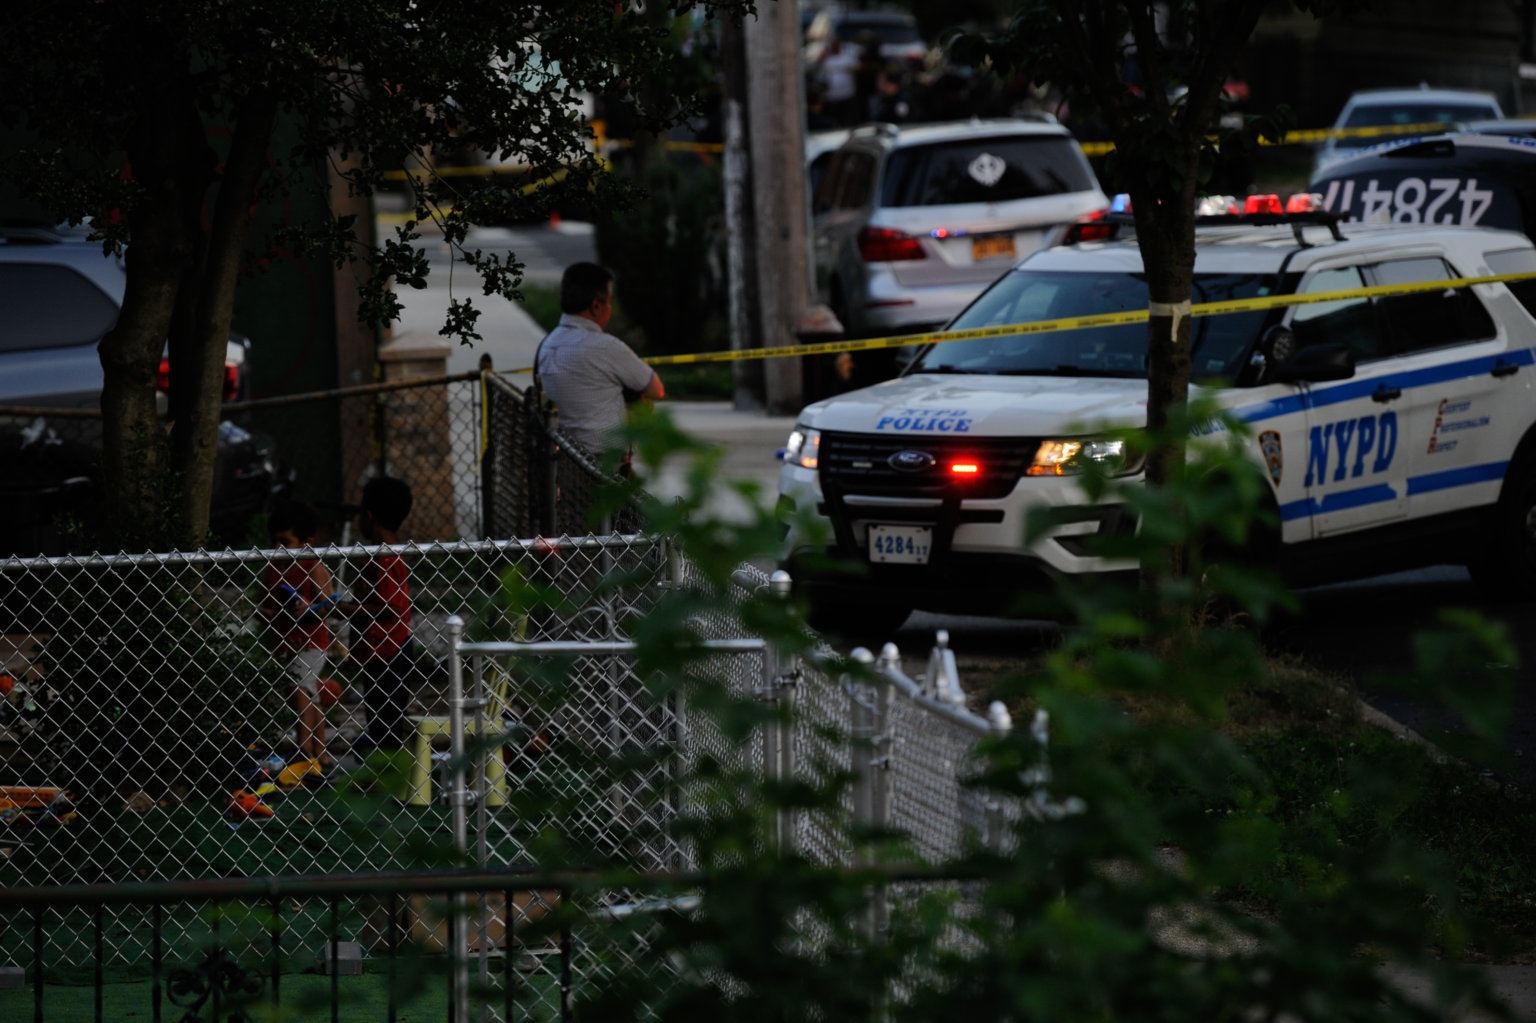 Man stabs four to death in New York's Queens, police shoot him dead